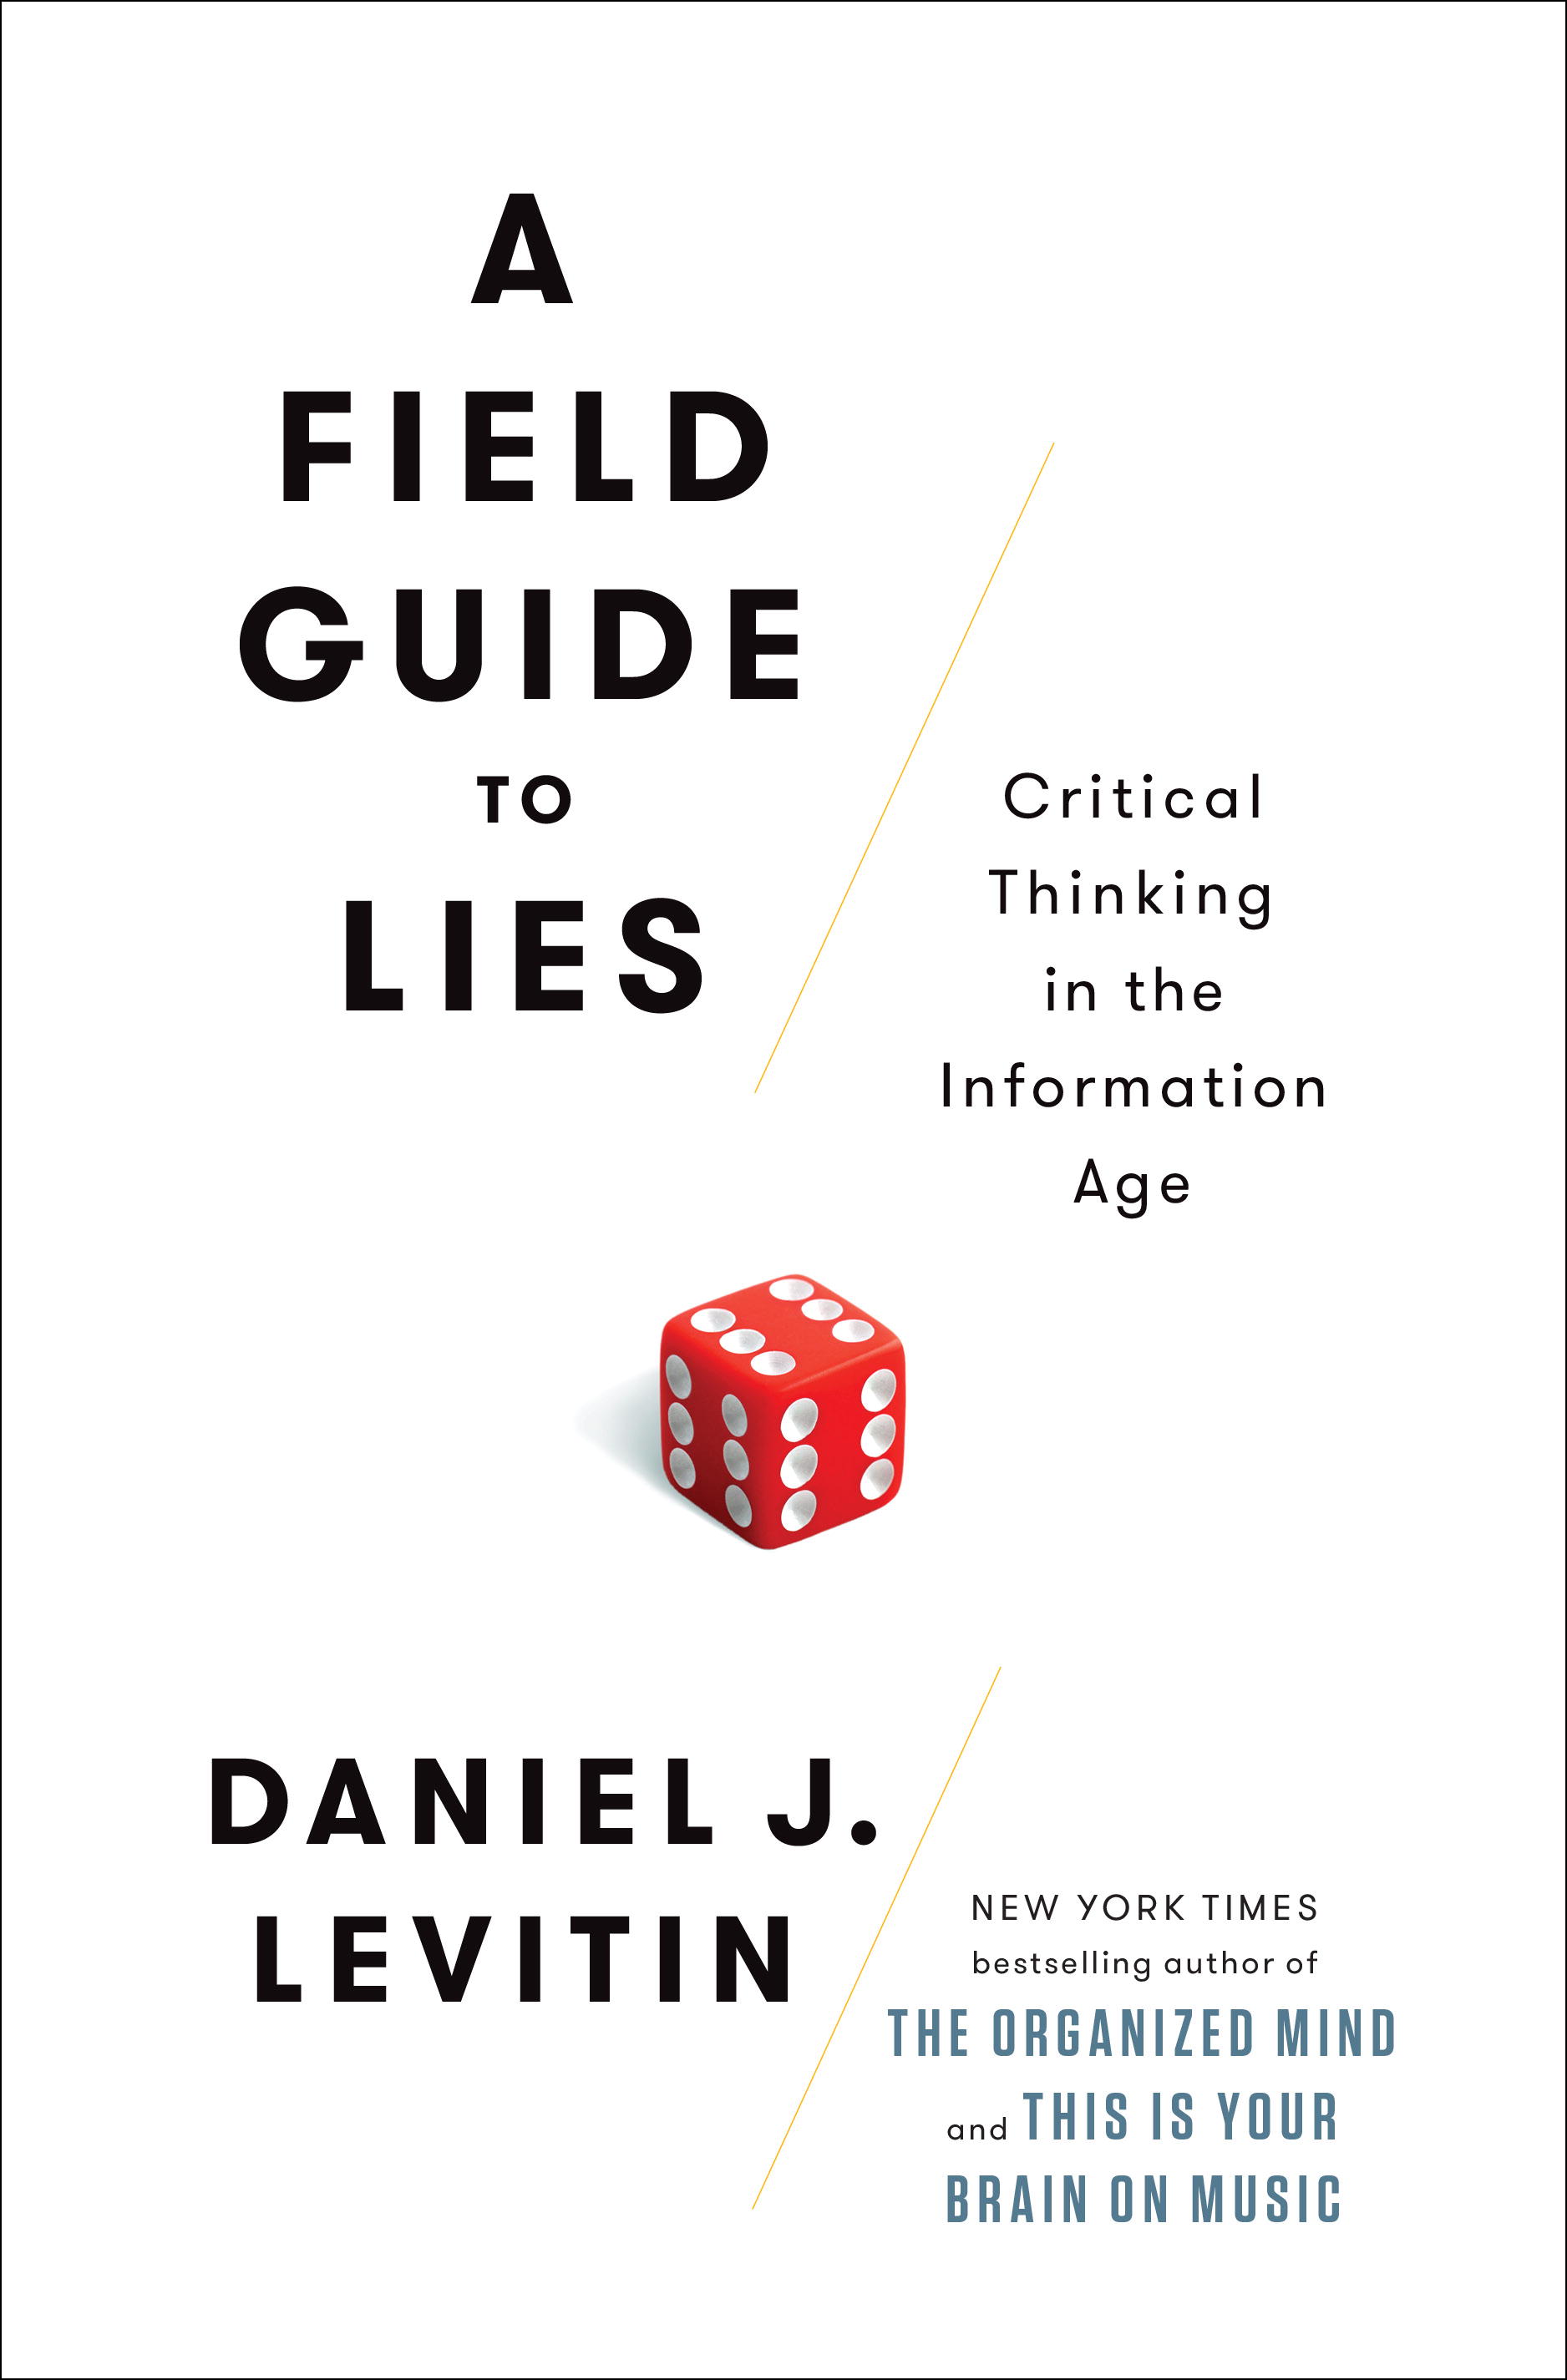 Image de couverture de A Field Guide to Lies [electronic resource] : Critical Thinking in the Information Age